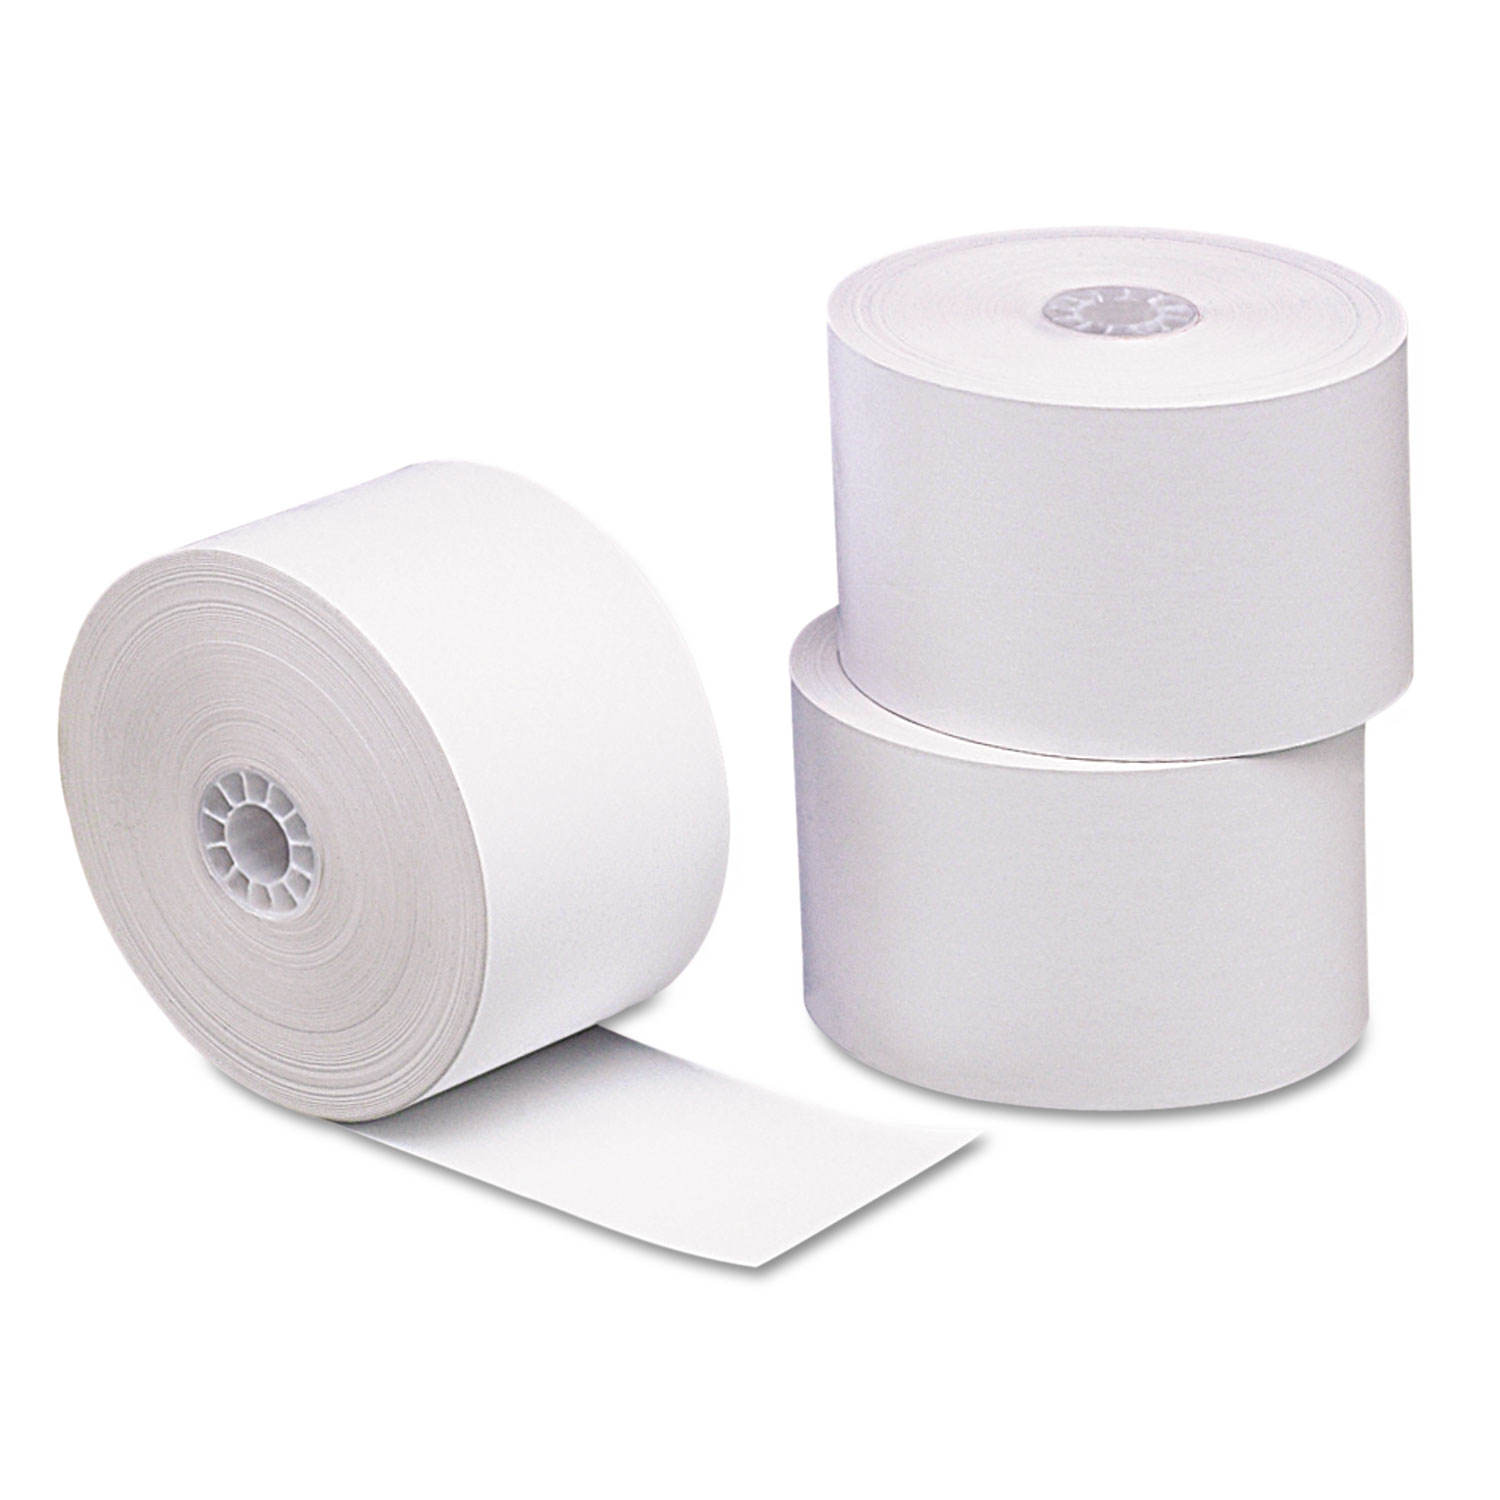  Iconex 18998 Direct Thermal Printing Thermal Paper Rolls, 1.75 x 230 ft, White, 10/Pack (ICX90781357) 